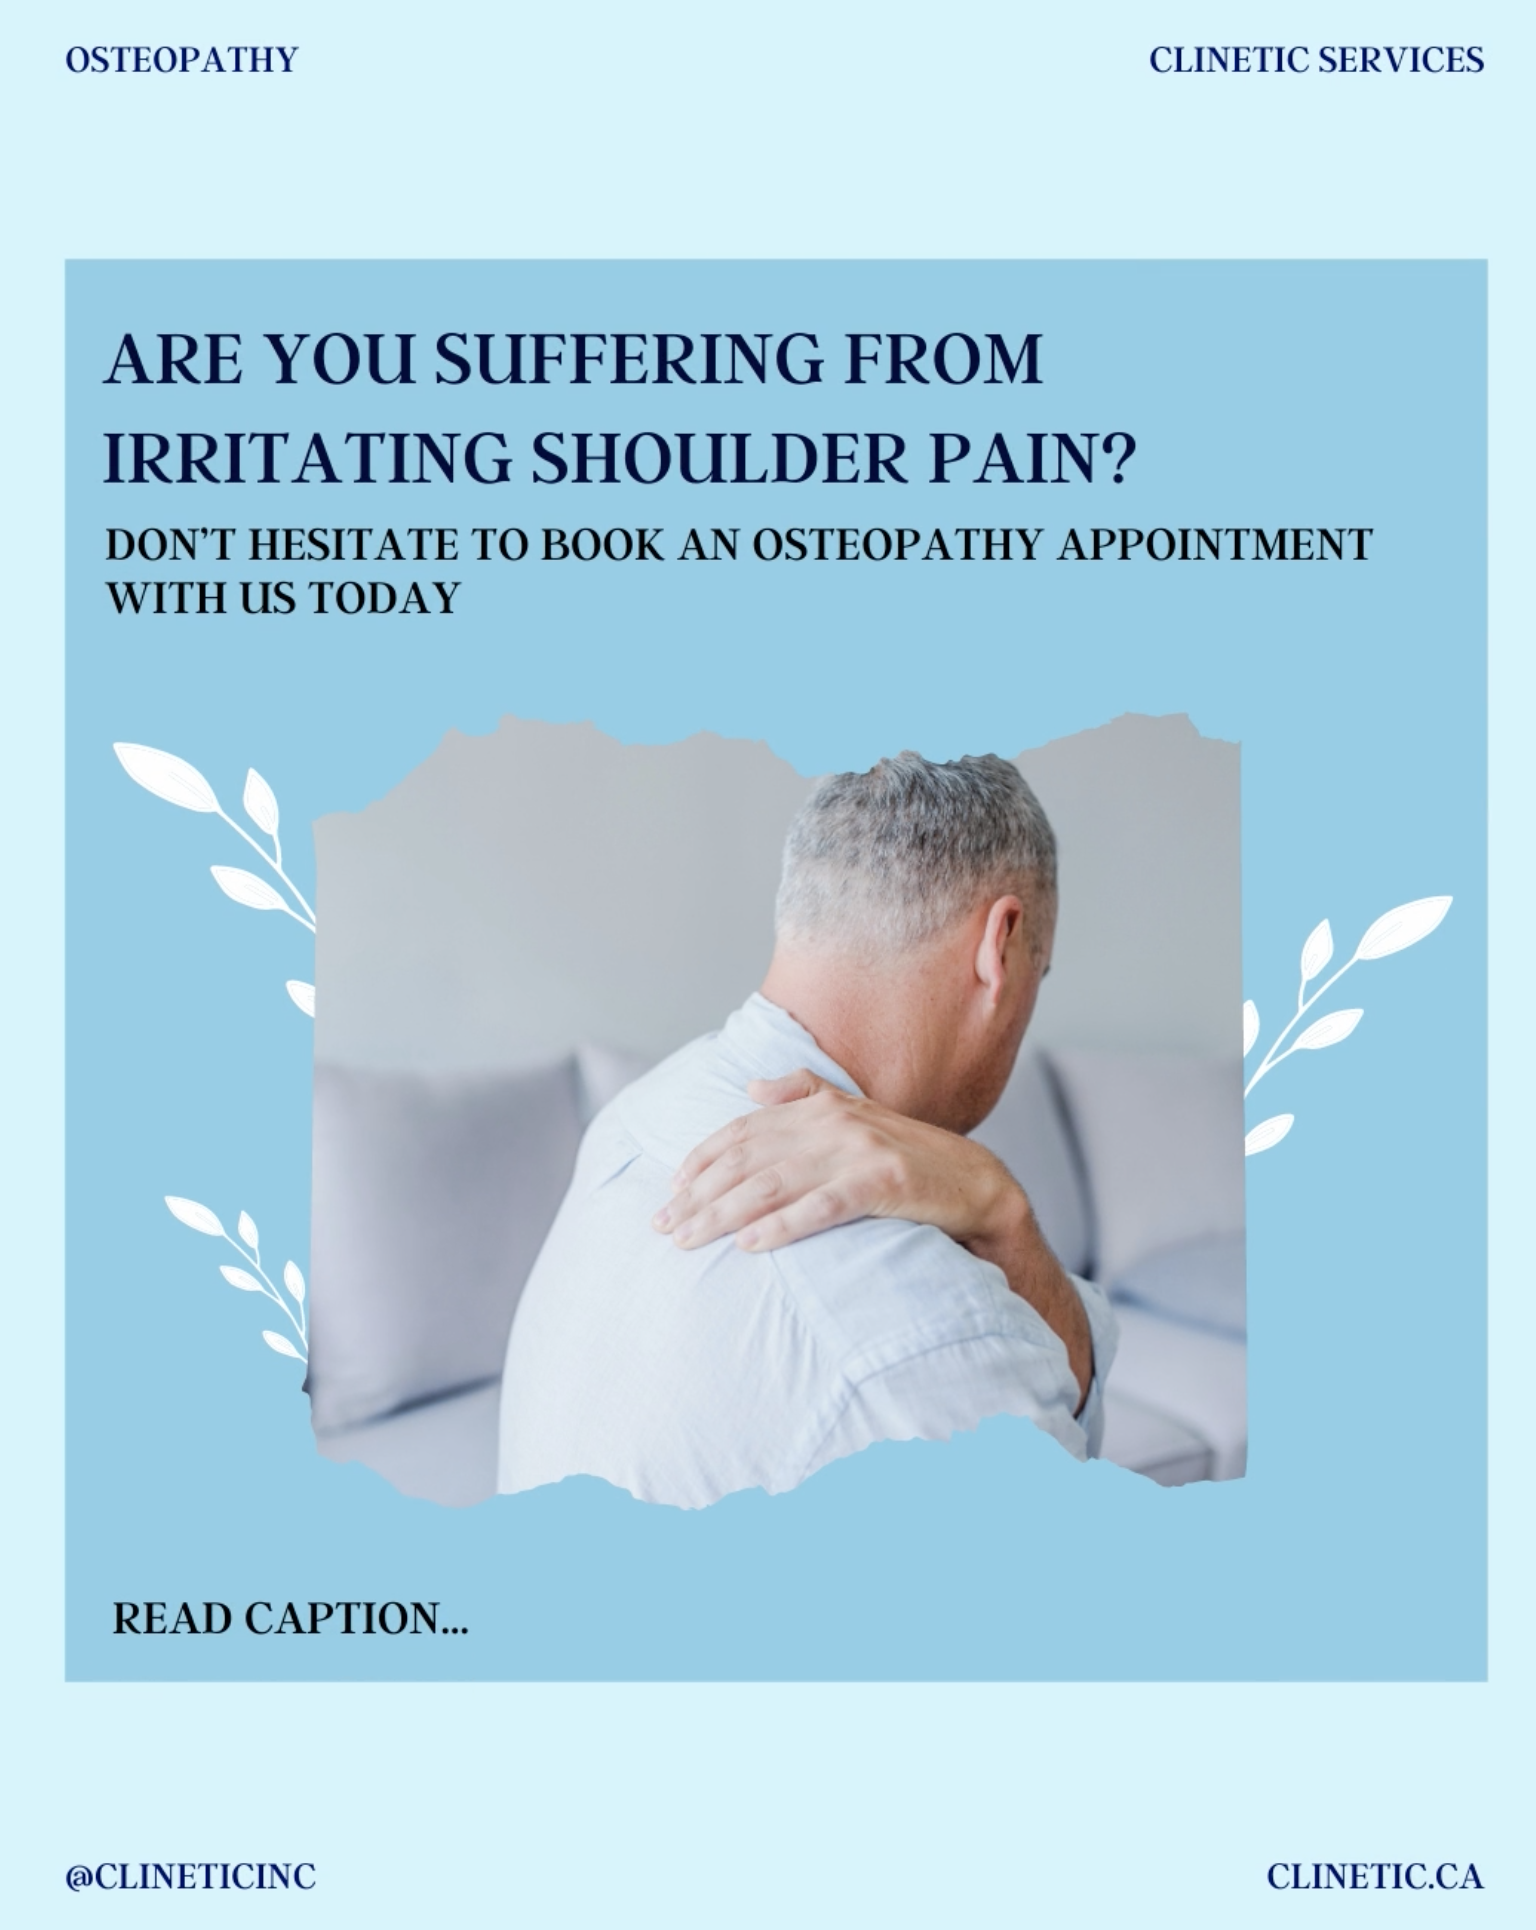 Are you suffering from irritating shoulder pain?